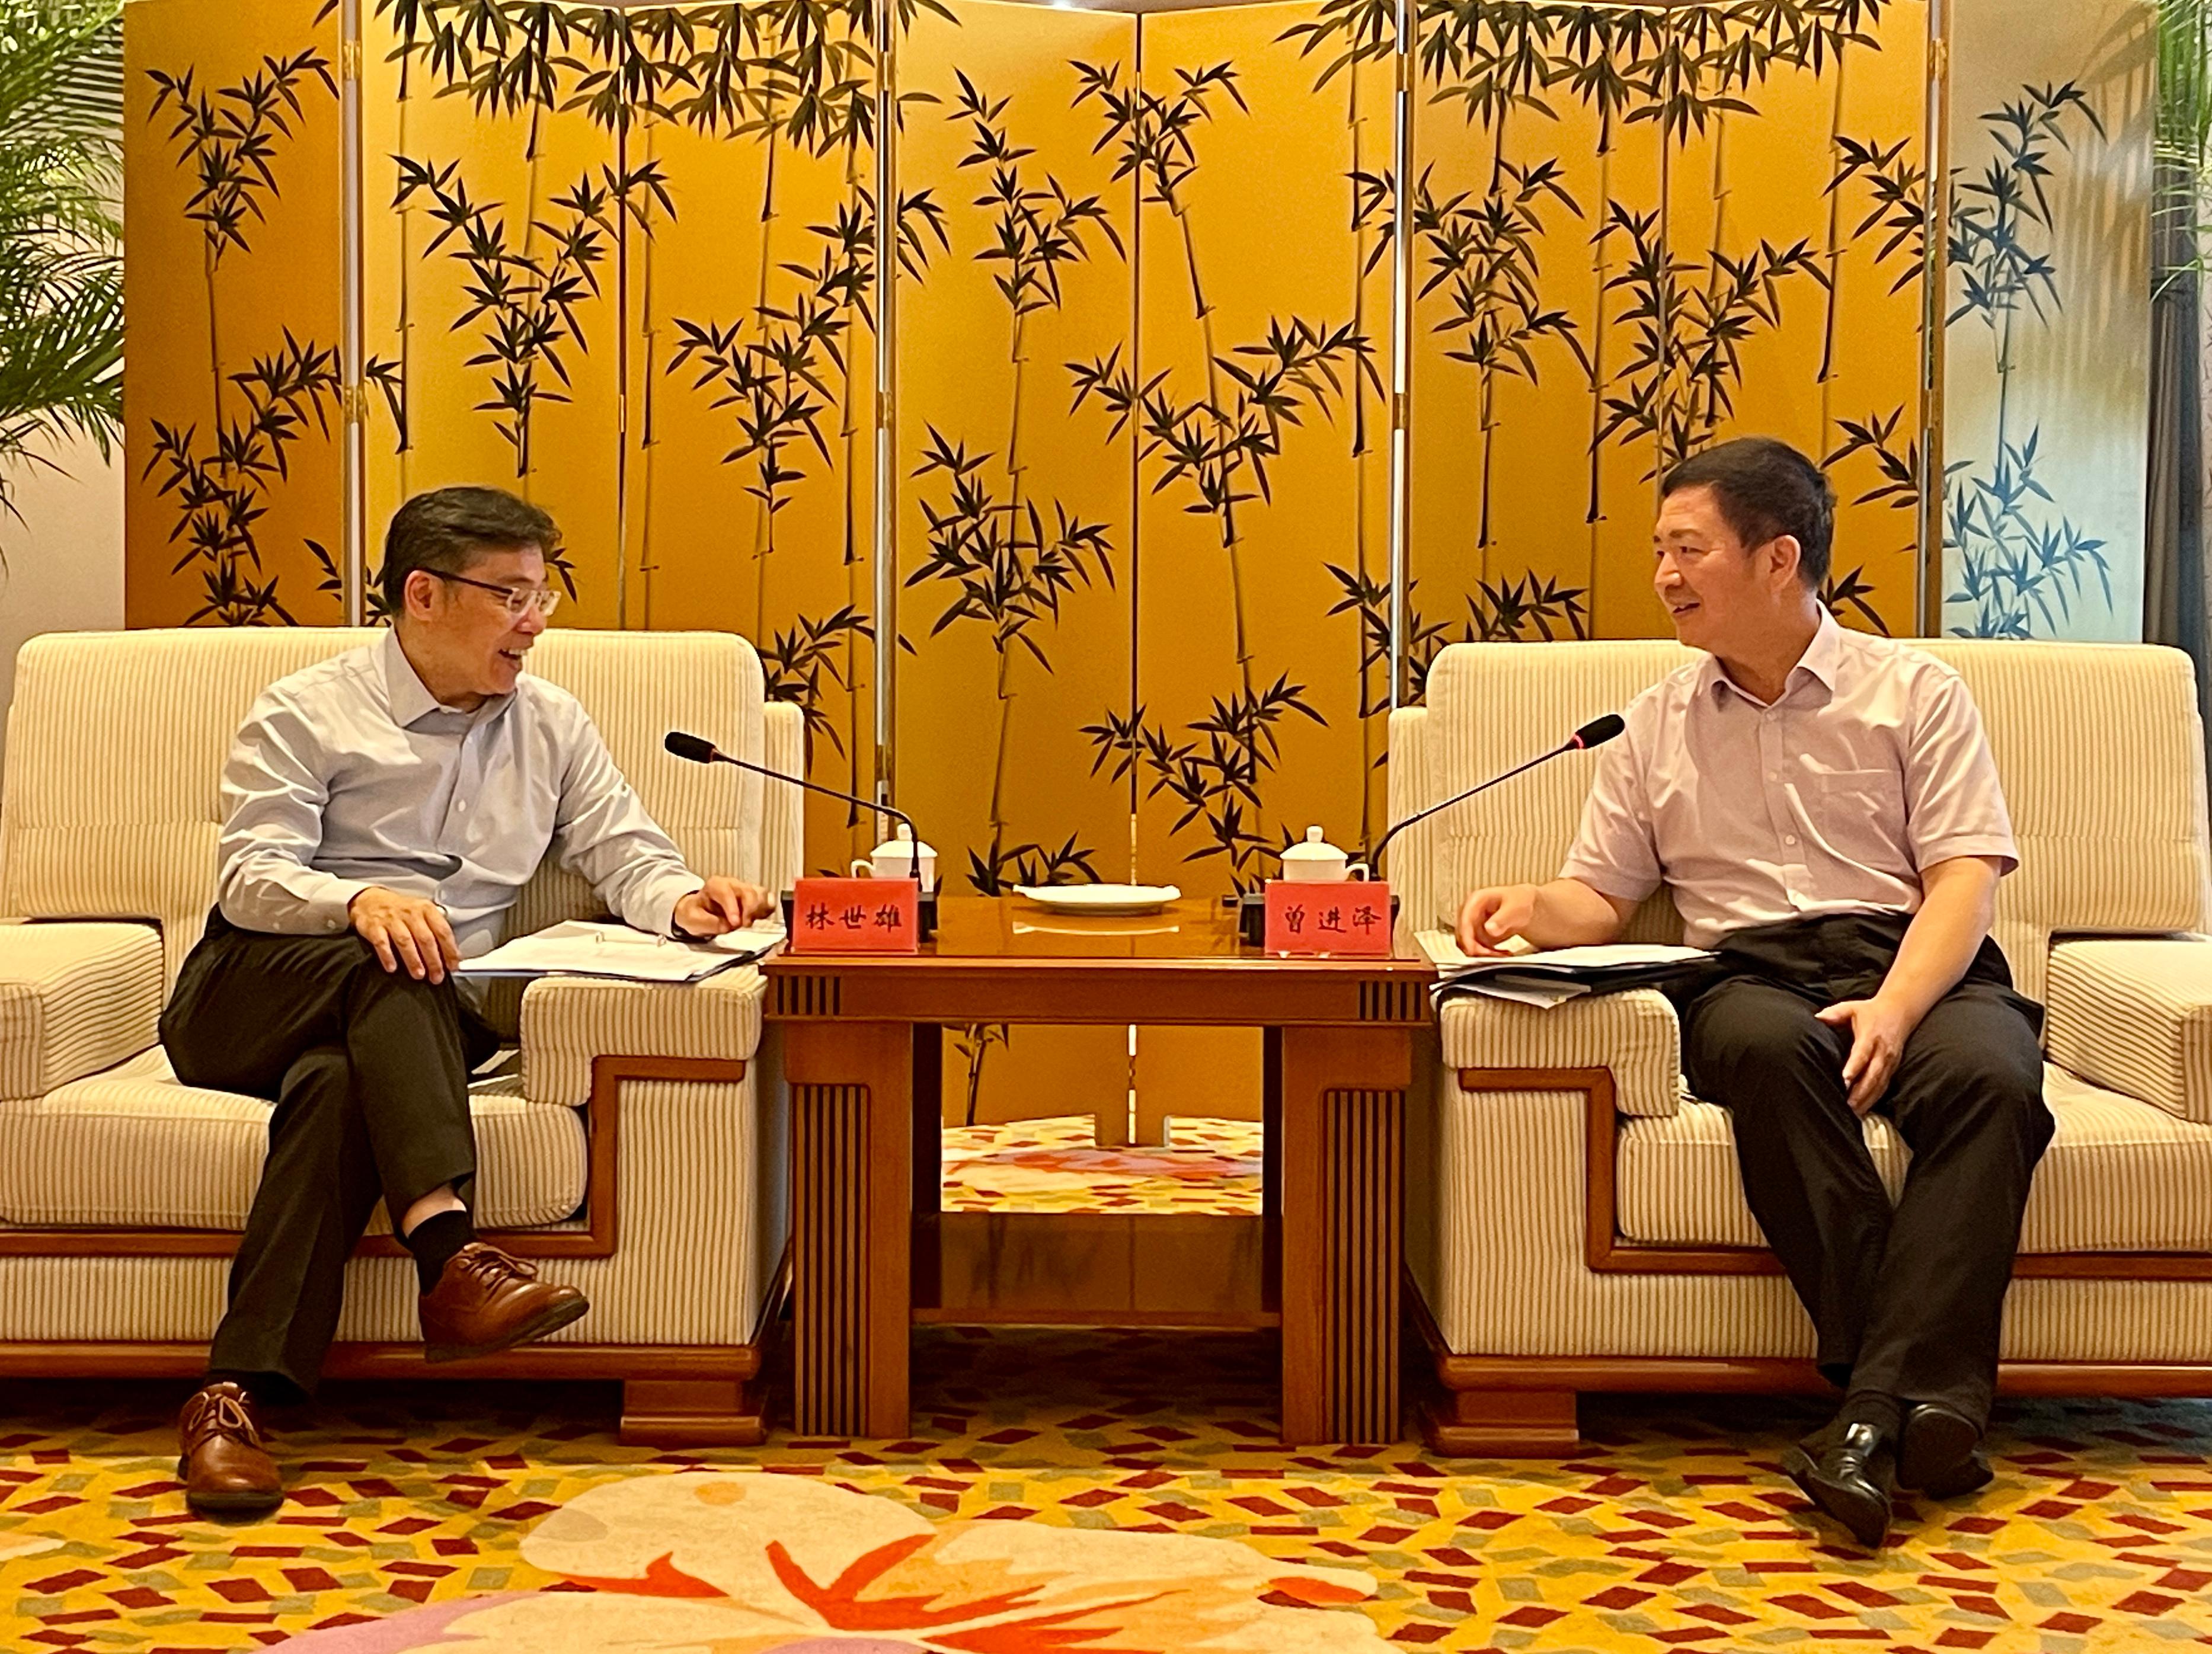 The Secretary for Transport and Logistics, Mr Lam Sai-hung (left), meets with the Mayor of the Zhanjiang Municipal Government, Mr Zeng Jinze (right), today (June 5) to discuss collaboration opportunities between the two places. 